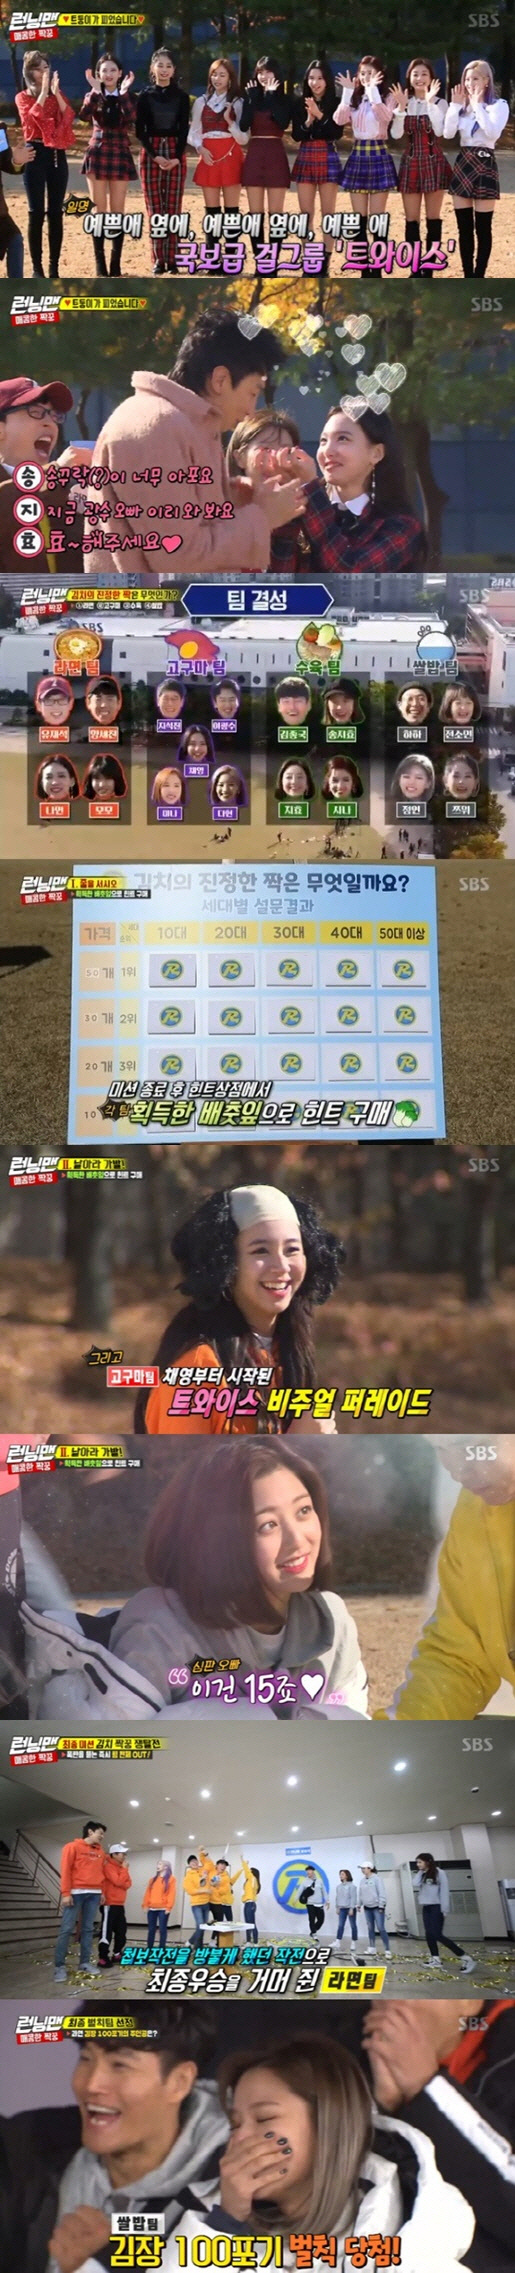 <p>TWICE of the Square is a great 100 give Driving Cycle penalty on winning.</p><p>2 days broadcast SBS variety shows <Running Man>(rendering this exchange, Kim for the photos)Kim of the real mate to find Kim the most distinctive ‘spicy paired peek-a-Boo’ lace decorated in the group TWICE with appeared.</p><p>This day in the broadcast race team into a confrontation steadily. This La team is Yoo Jae-Suk, Yang and more as well, TWICE the memory, better, Sweet potato team at Suk Jin, Lee Kwang-soo, TWICE by Chae, Mina, Implementation, Training, Team Kim Jong Kook, Song JI Hyo, and excess of, valid, the Rice team in that one, small people, TWICE of the square, Zwinger for configuration.</p><p>Each team has a ‘line’ through the game fierce confrontation unfolded, the team, the academic team, and Sweet potato teams each have 1 win each to share and earn hints. Round 2 of the ‘fly! The wig-switching in the Sweet potato with the team if the team is 1 for, 2 for to or once the hint is acquired.</p><p>The final round of the menu that is attached to the name tag off of the menu when exchanging while the bomb is attached to the name tag off if the team power is out and the menu until the opposing team to go beyond ‘the race’began. Ago min is Lee Kwang-soos name tag off, but Lee Kwang-soo is a bomb was it in the Rice team the power is out. Father new exchange rate if the team is info start to unfold and ‘kimchis true even’exclaim the headquarters seat and headed towards and education team support available to the team or the name of the tag off as when I smoke “then”and cry victory.</p><p>Meanwhile Kim 100 give Driving Cycle penalty for the uncle in the game Rice team of the square ‘shit son’, born and penalties in winning was and this scene is up to 8. 8%jump in the ‘best 1 minute’.</p><p>Viewership research company Nielsen Korea in the past 2 days broadcast <Running Man>is the main advertising officials of the important indicators here are age 20 to 49 years (‘2049’) target viewership in the 4. 5%(NCR, furniture, Part 2 viewership standard)recorded at the same time ranked # 1. Average viewership is part 1 of 5. 3%, Part 2 7. 7%(the NCR furniture viewership standards)was per minute, with a maximum application rate is 8. Up to 8% jumped.</p><p>Meanwhile, <Running Man>is every week Day Afternoon 4: 50 in the broadcast.</p>